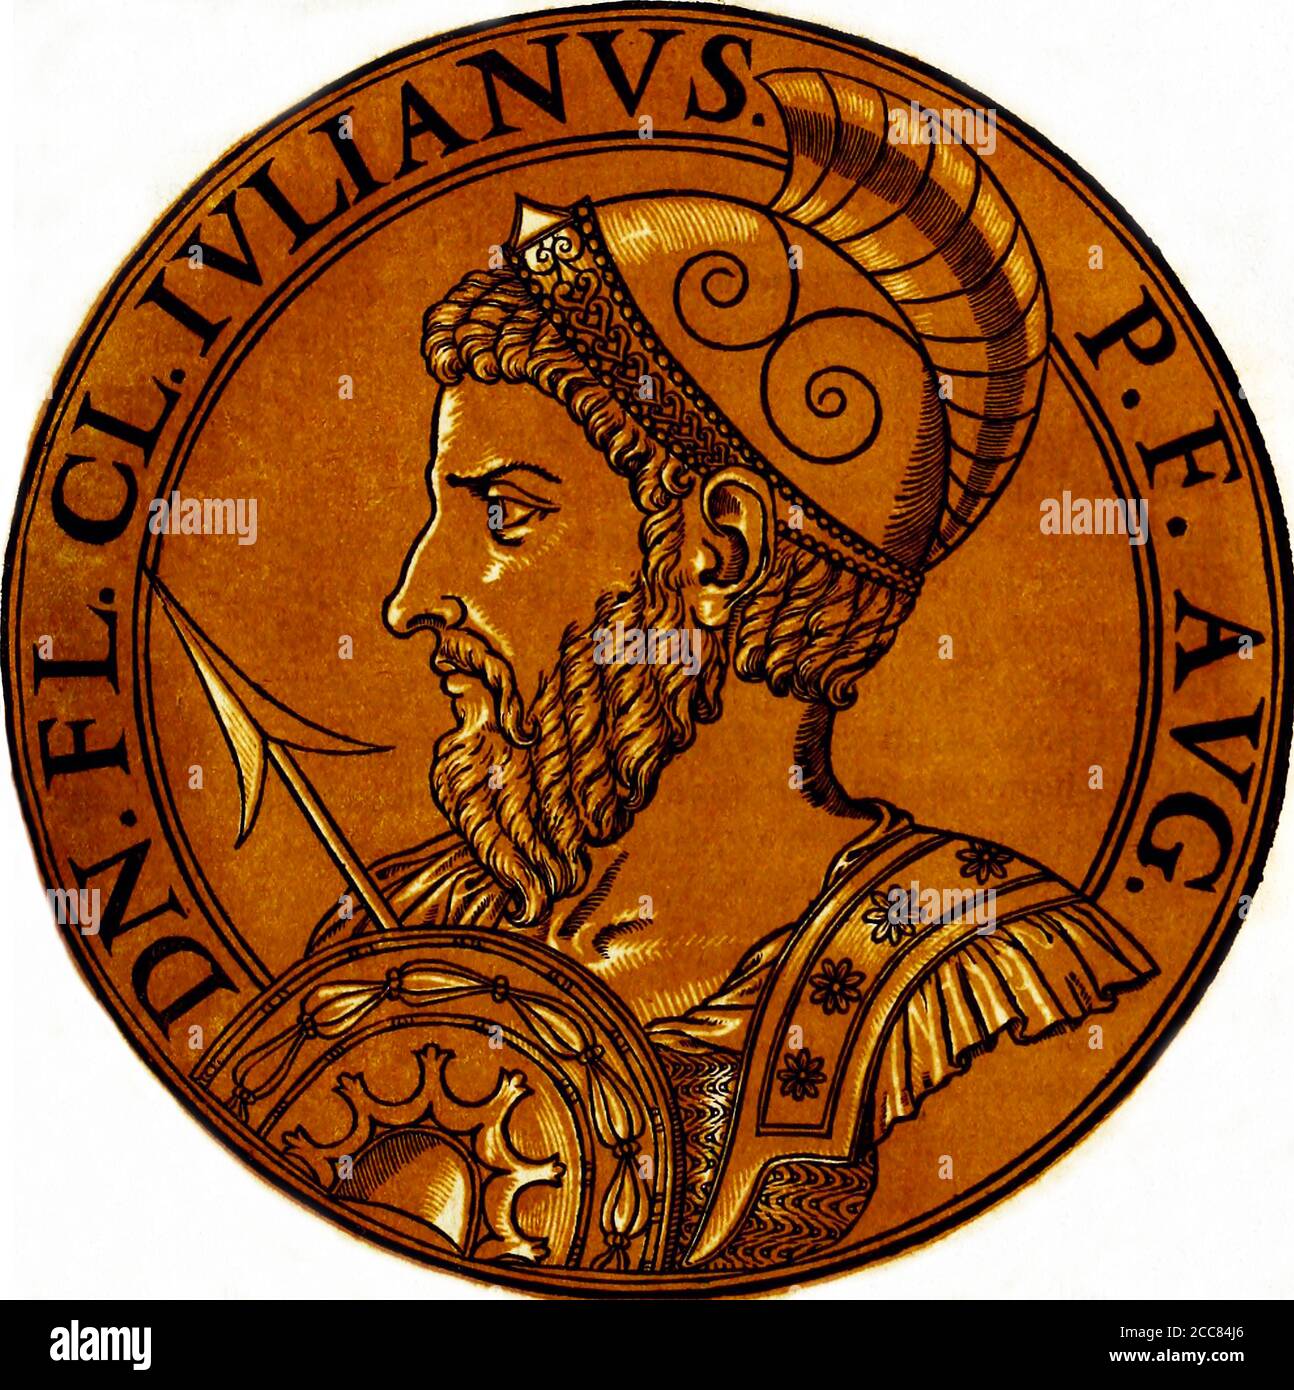 Italy: Julian the Apostate (331-363), 63rd Roman emperor, from the book Icones imperatorvm romanorvm (Icons of Roman Emperors), Antwerp, c. 1645. Julian was a member of the Constantinian Dynasty and cousin to Emperor Constantius II. Emperor Constantius II made him Caesar of the western provinces in 355 while he was busy fighting the Sassanid Empire in the east, entrusting Julian against the Alamanni and Franks. Julian was proclaimed emperor by his soldiers in 360. Stock Photo